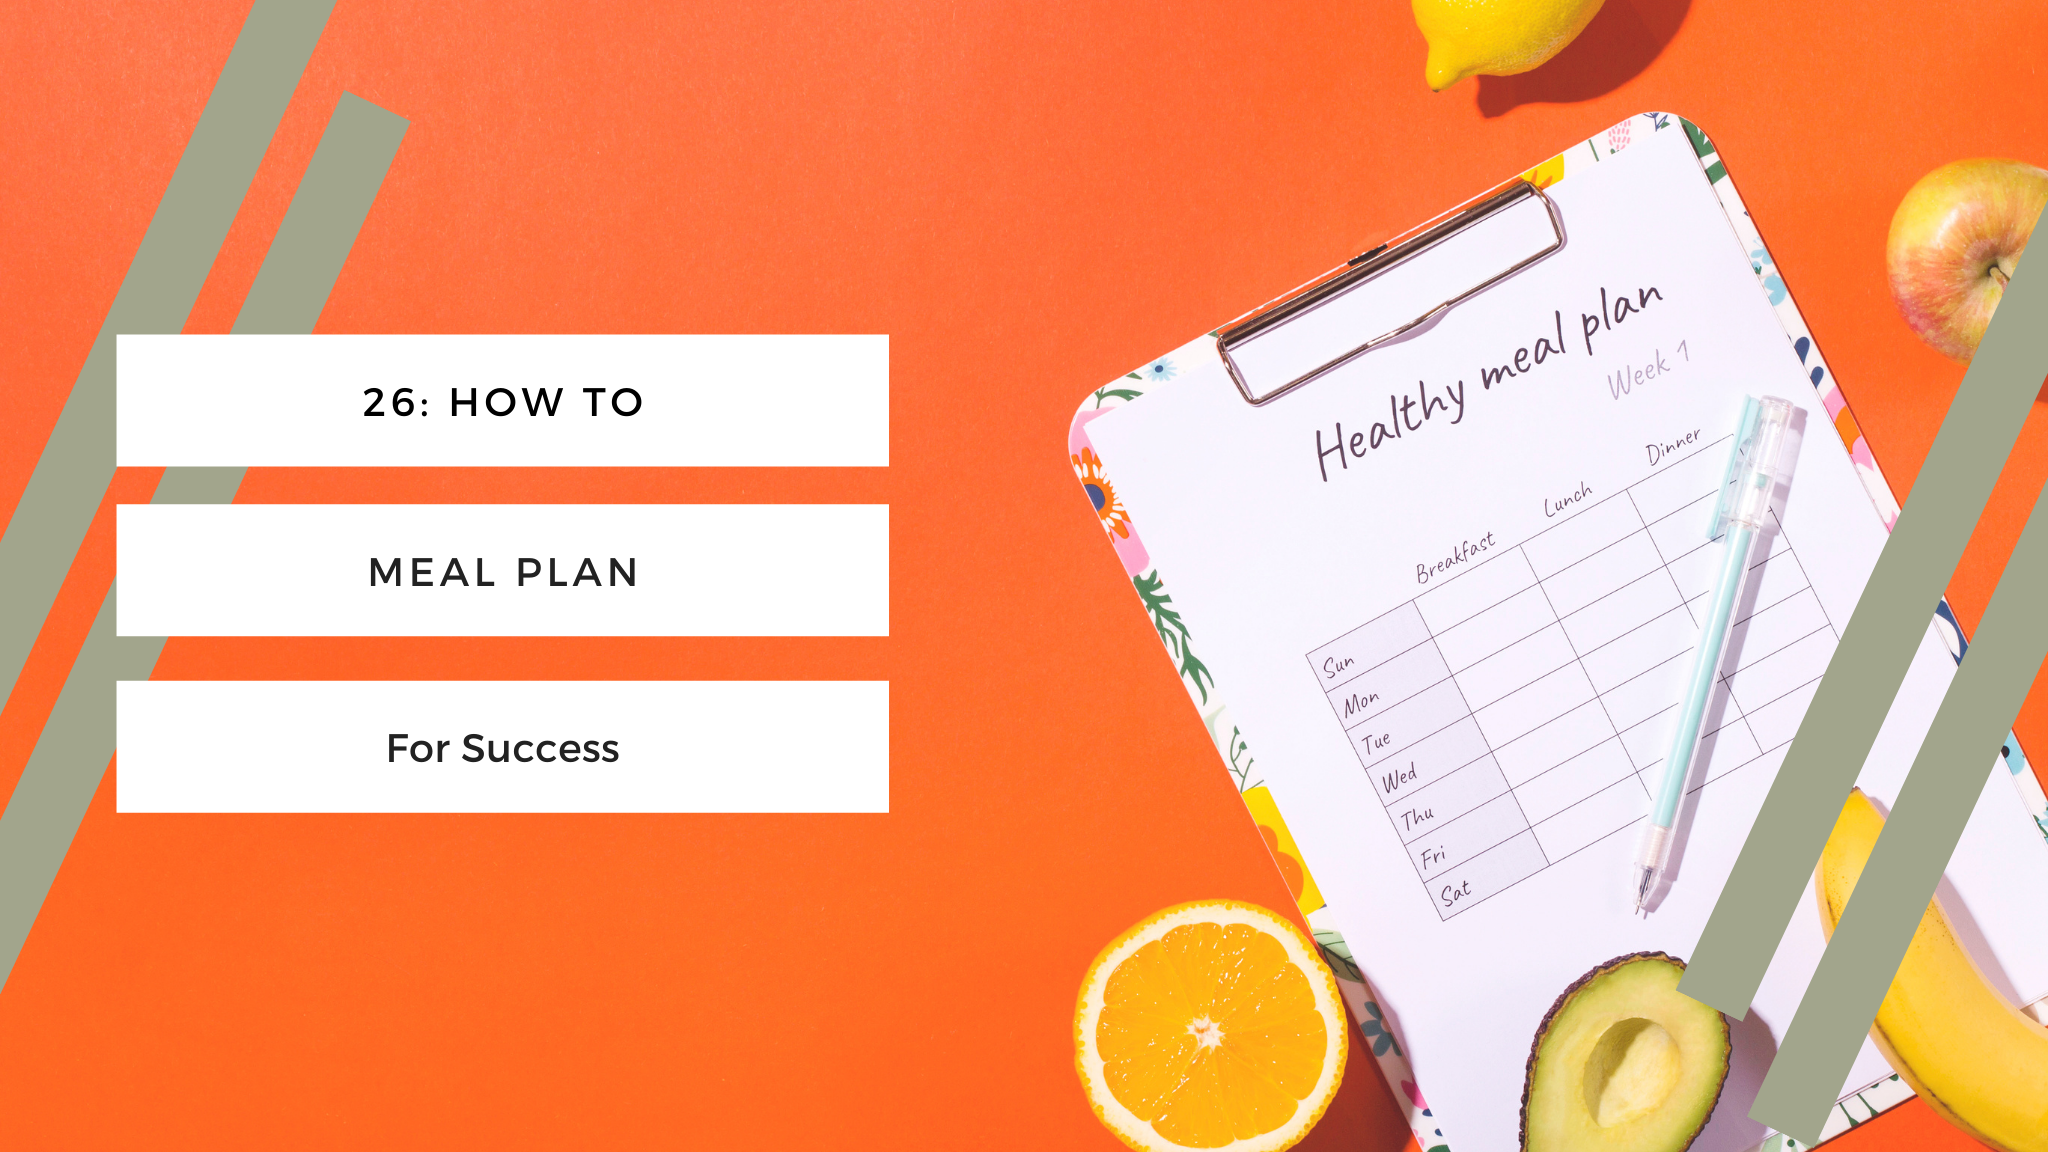 26. How to Meal Plan for Success